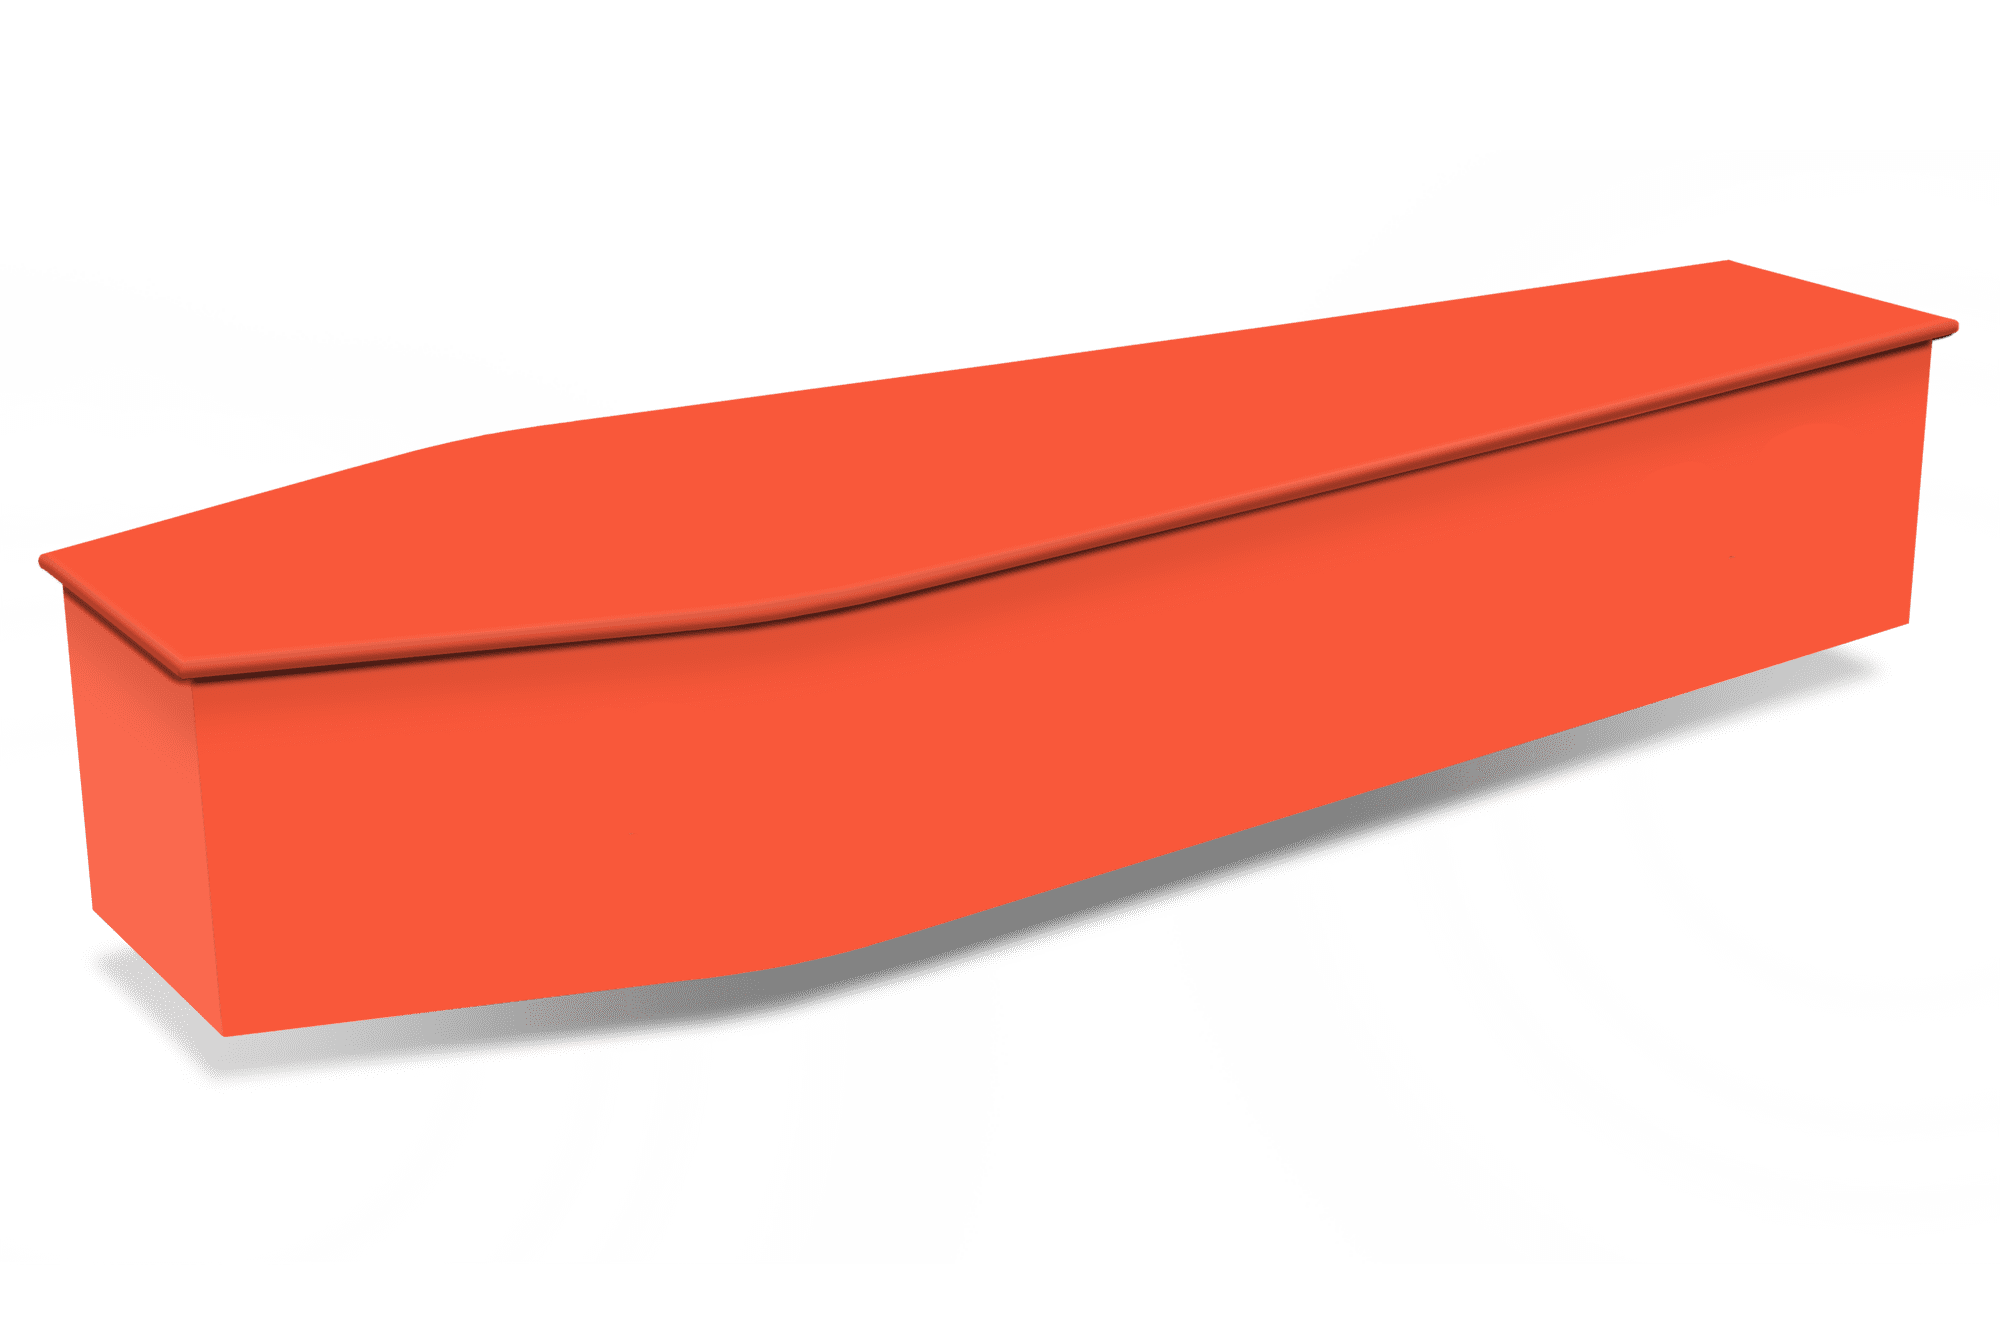 Circus coffin expression clipart image